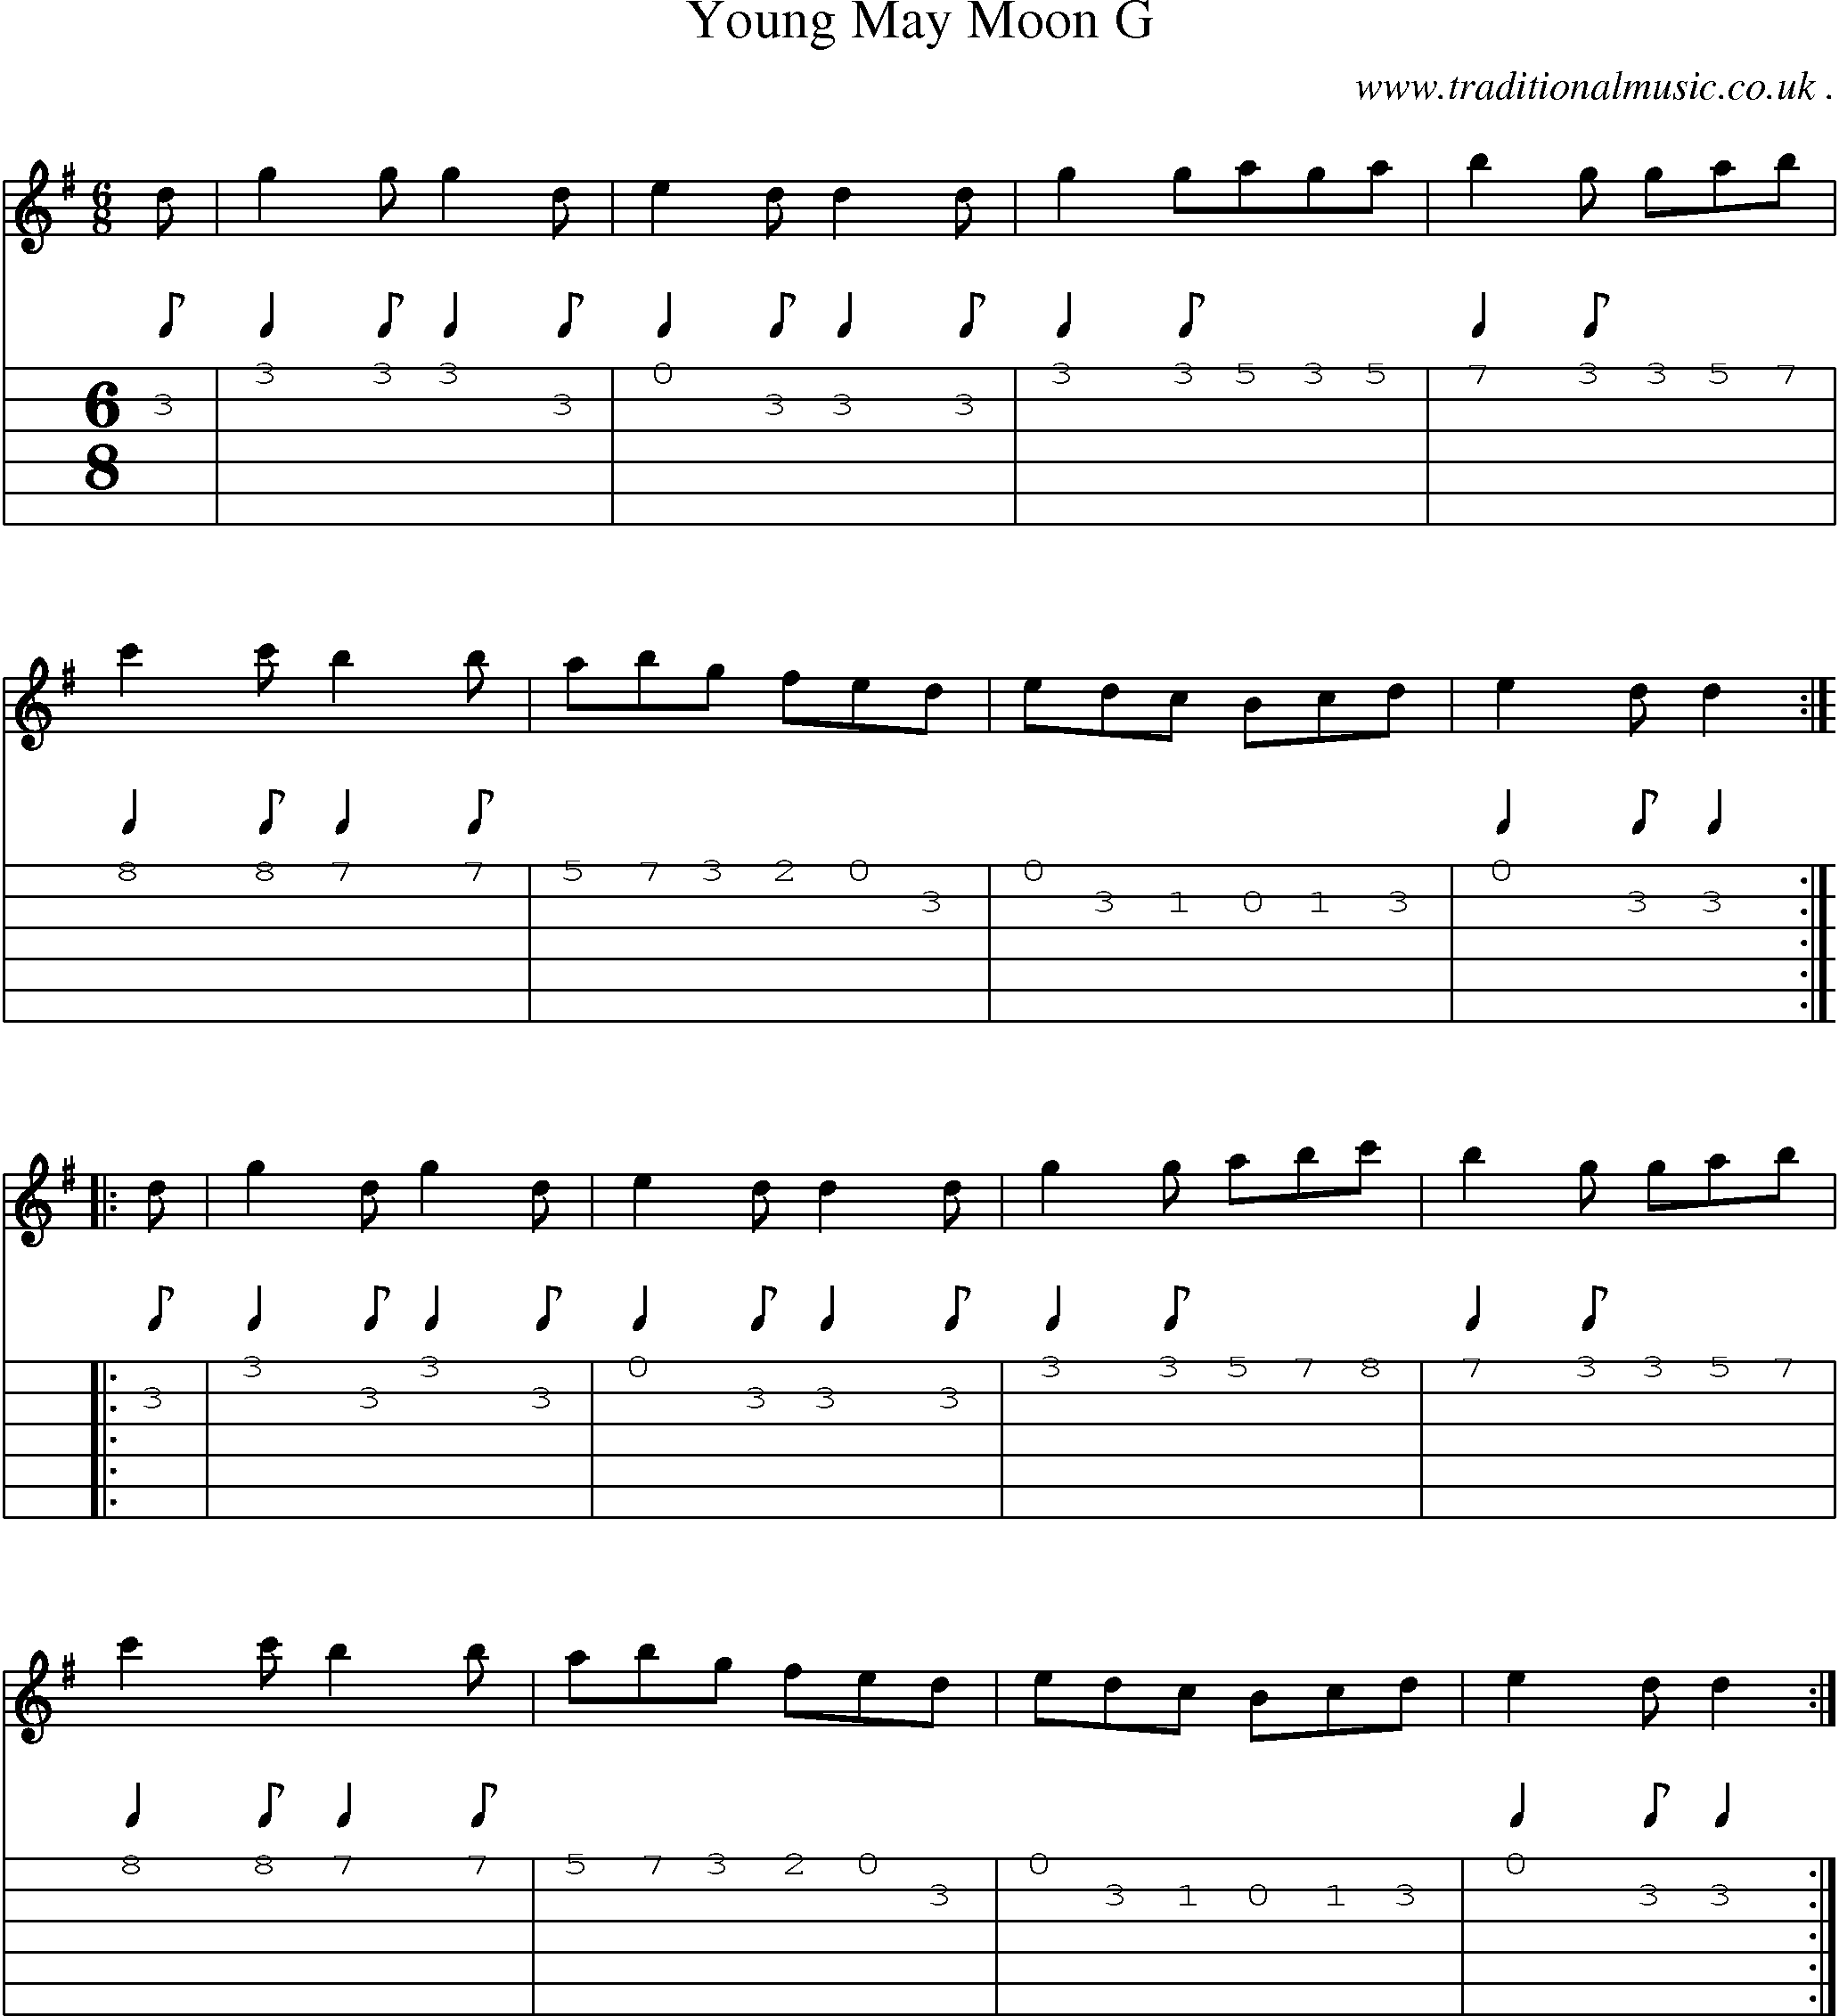 Sheet-Music and Guitar Tabs for Young May Moon G